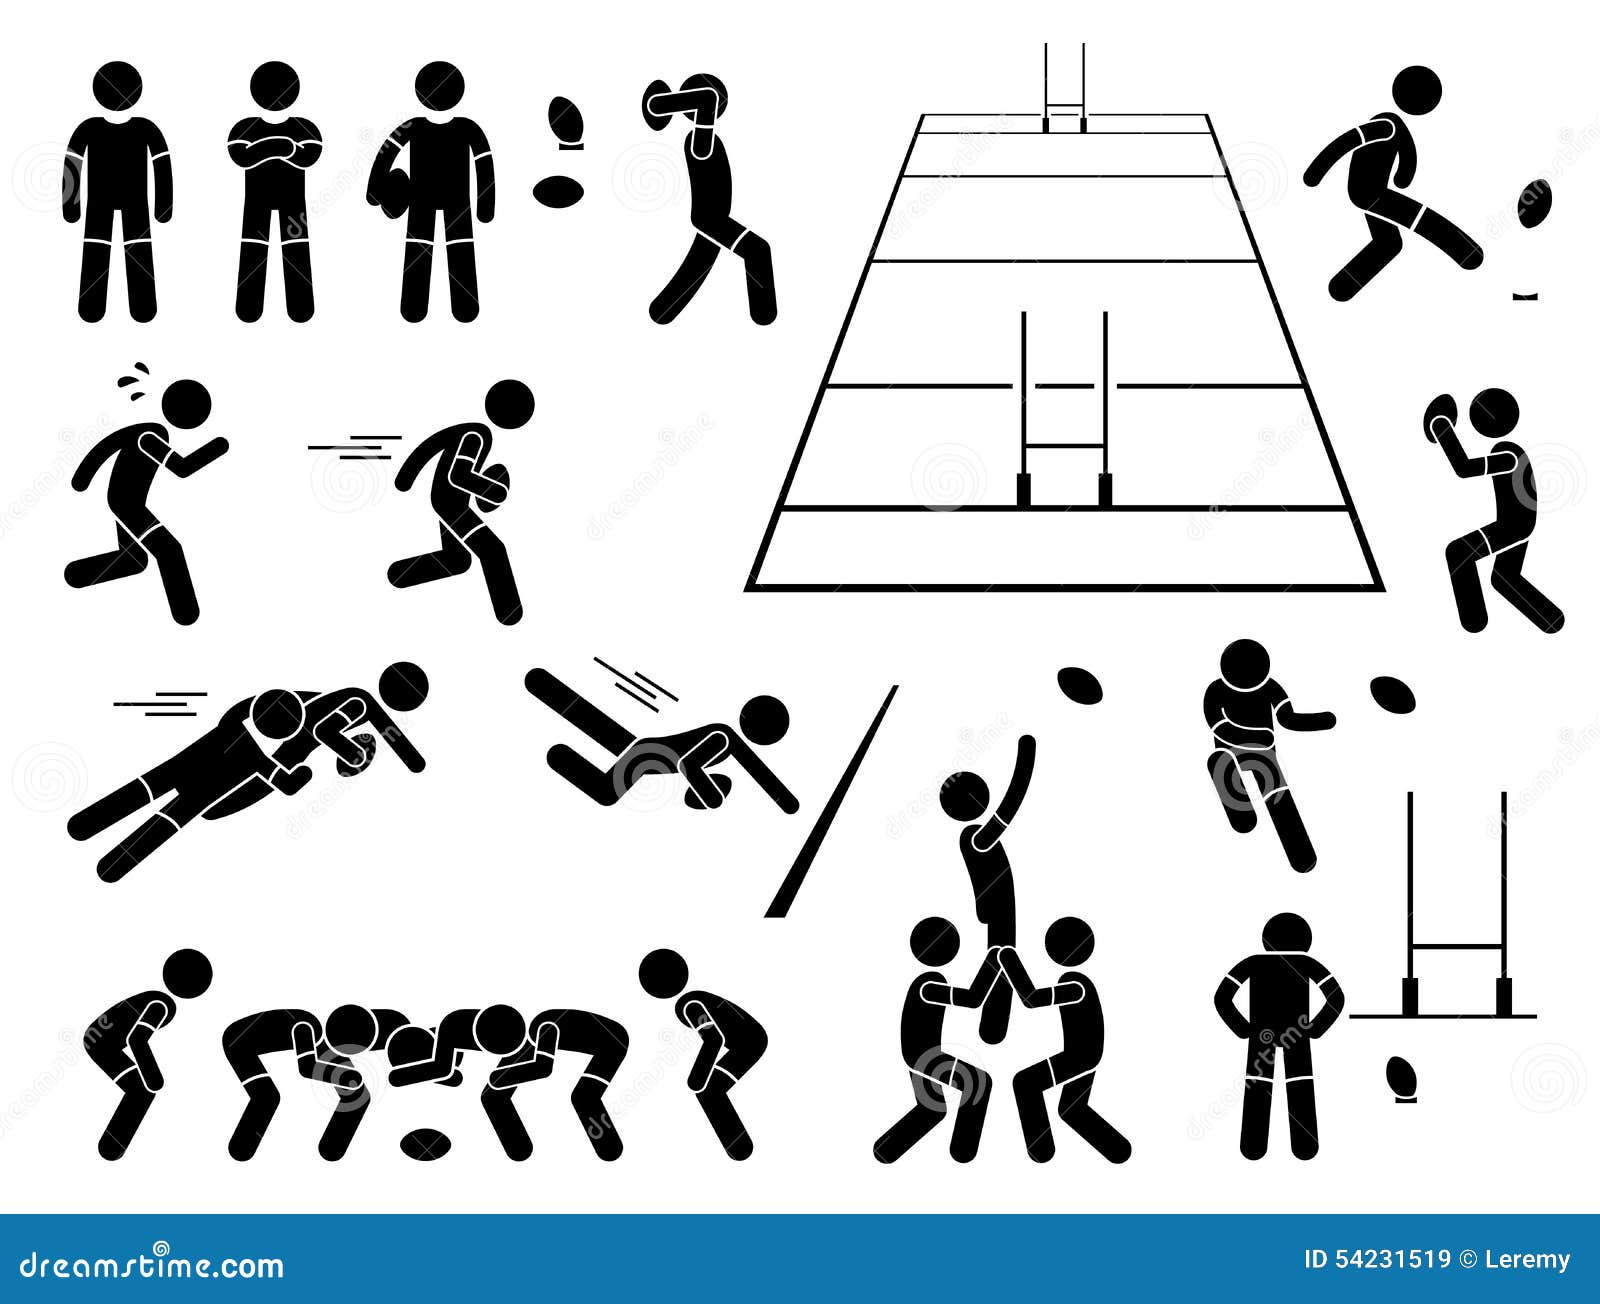 626 Rugby Tackle Stock Illustrations, Vectors & Clipart - Dreamstime